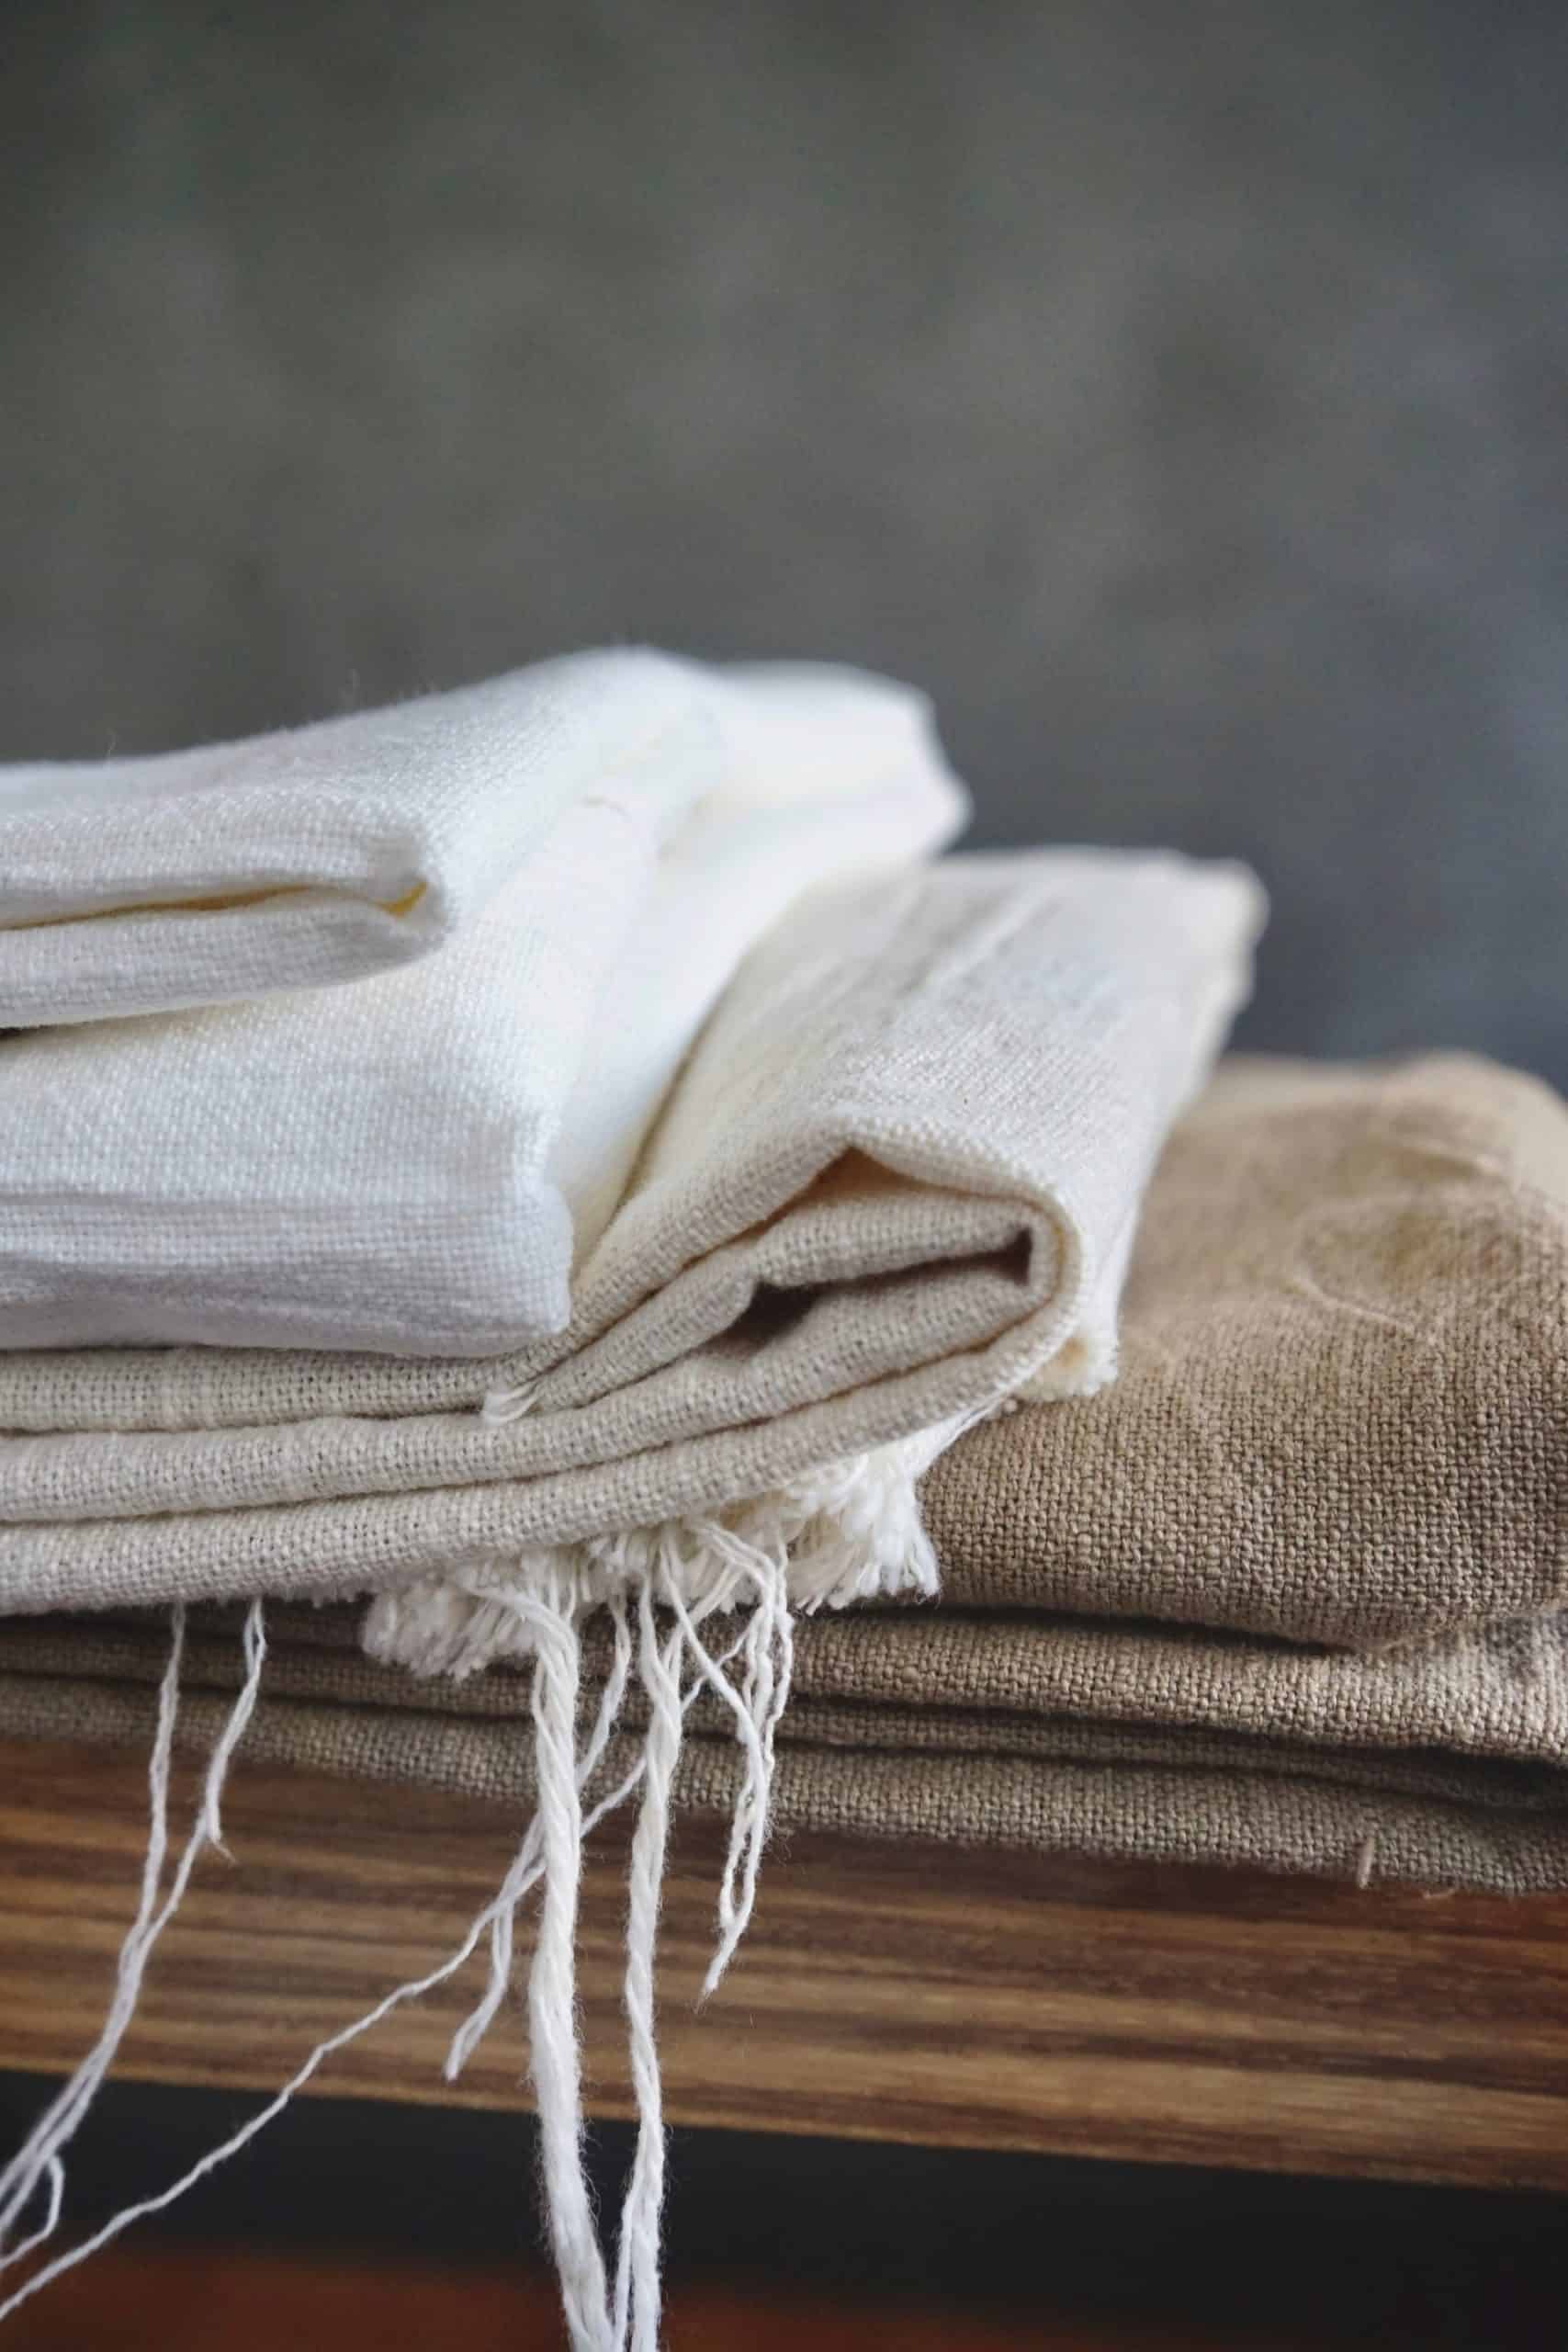 Make your table run more smoothly with a linen runner